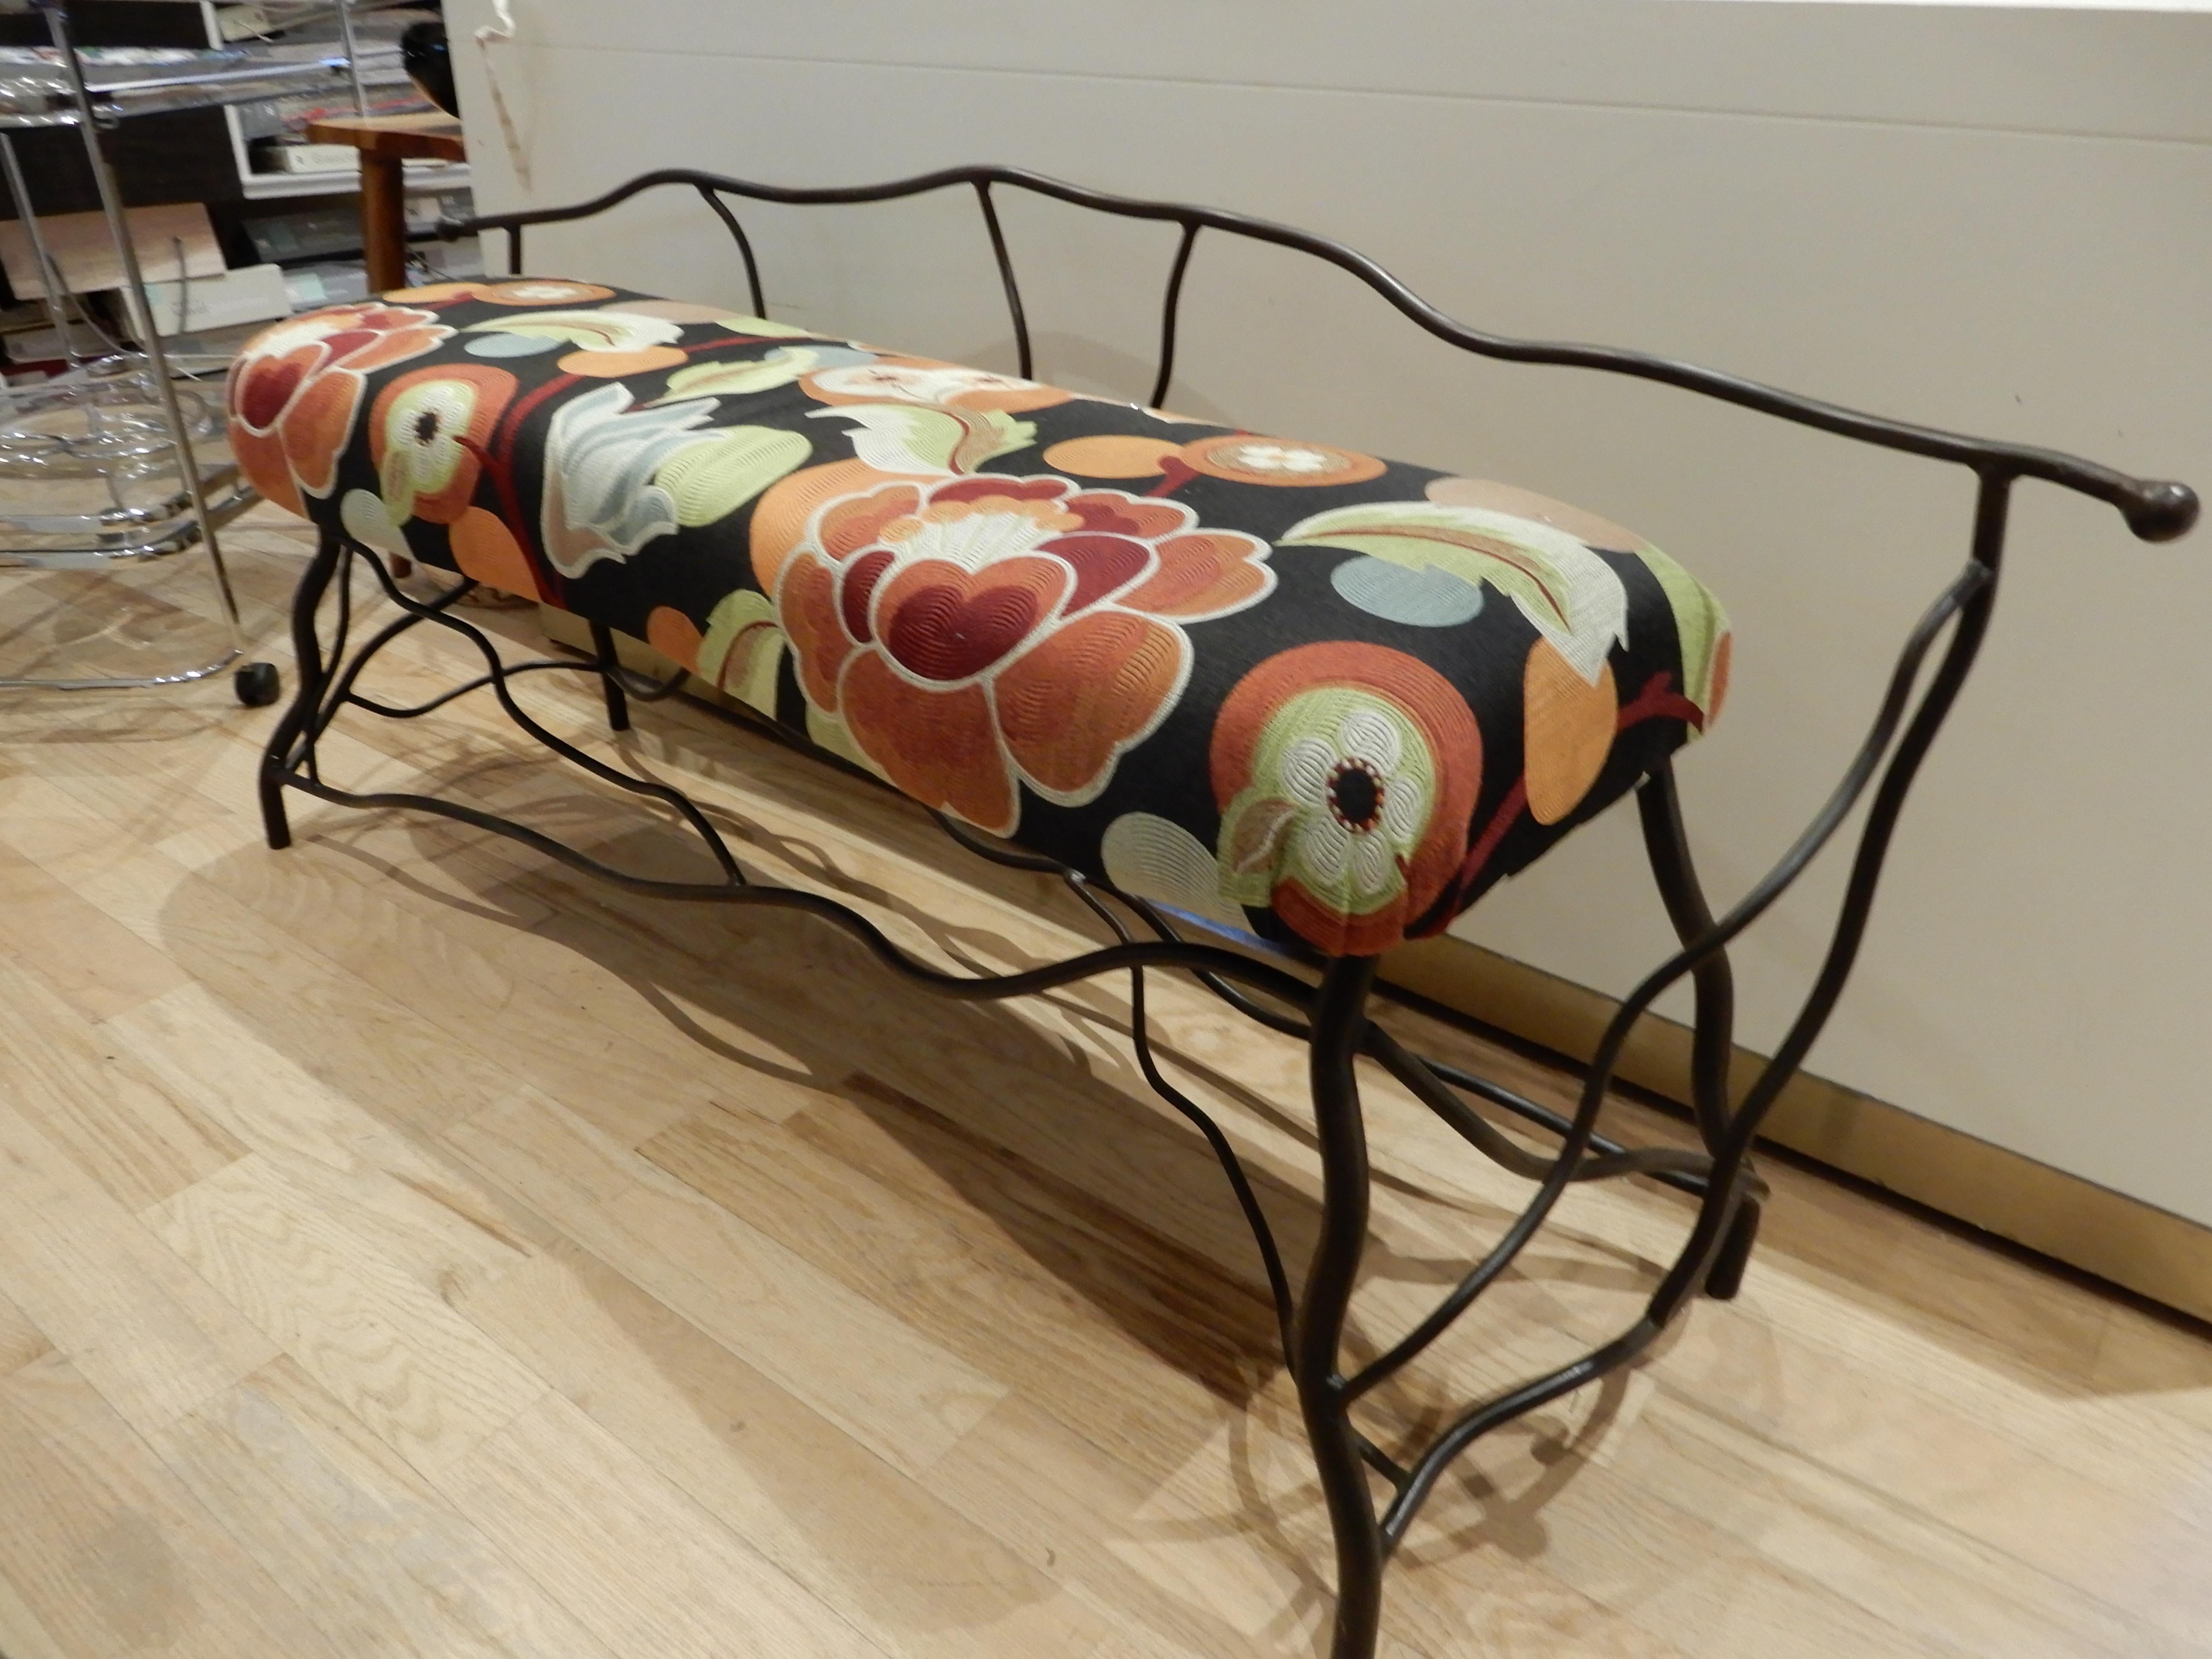 American Artisan Crafted Diego Giacometti Styled Upholstered Bench